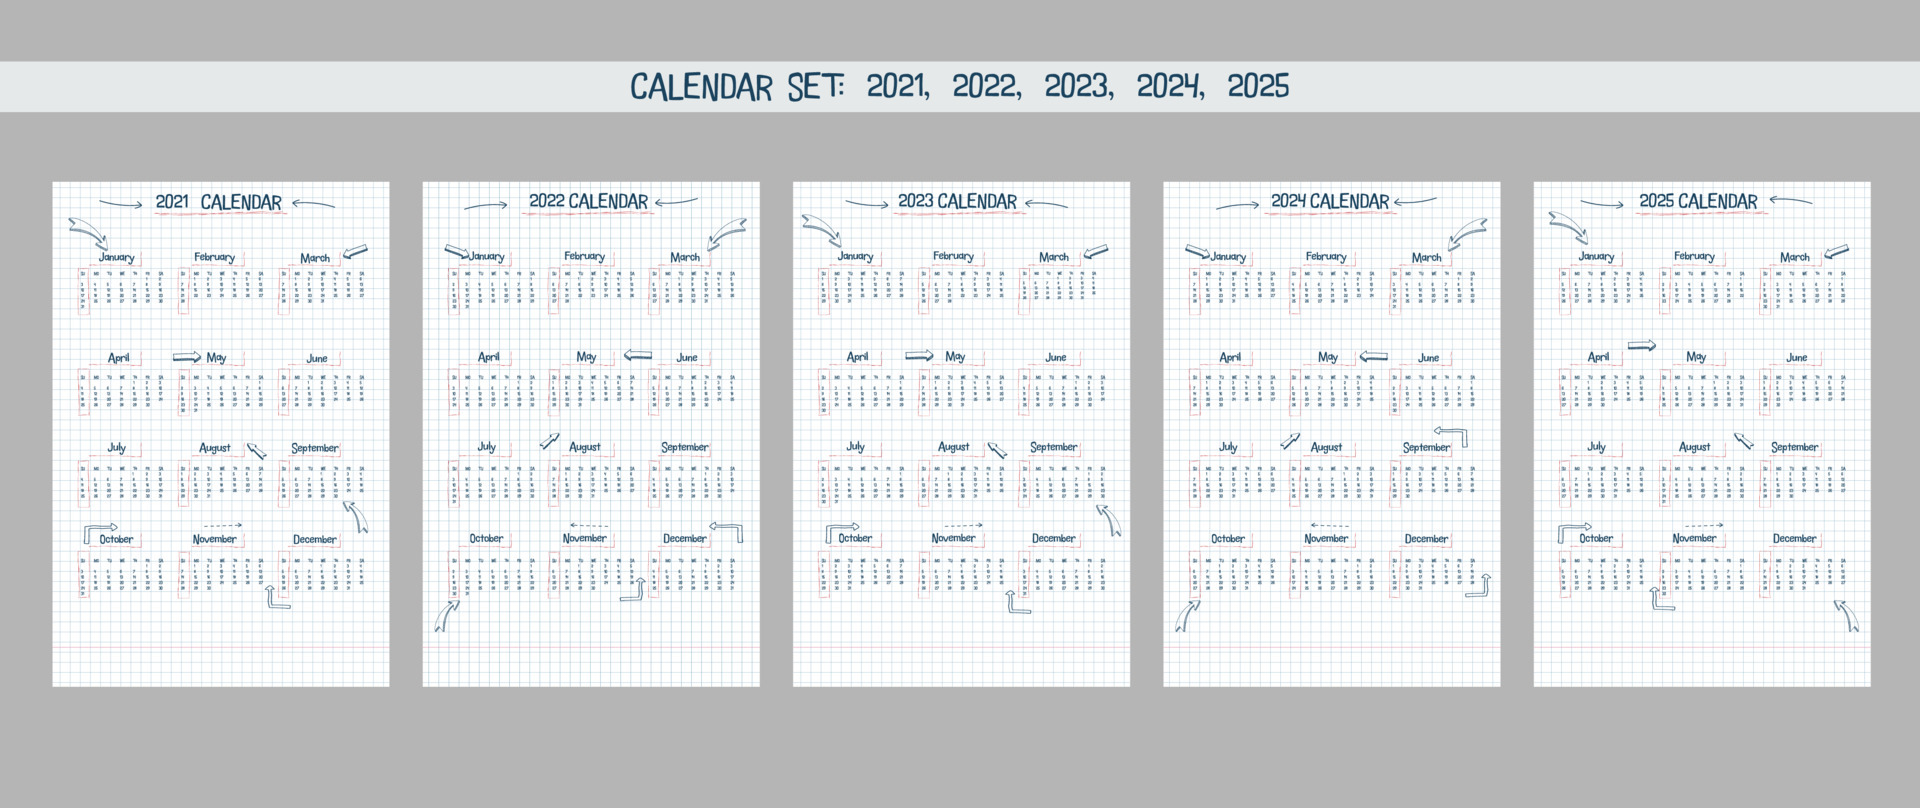 Scps Calender - Customize and Print